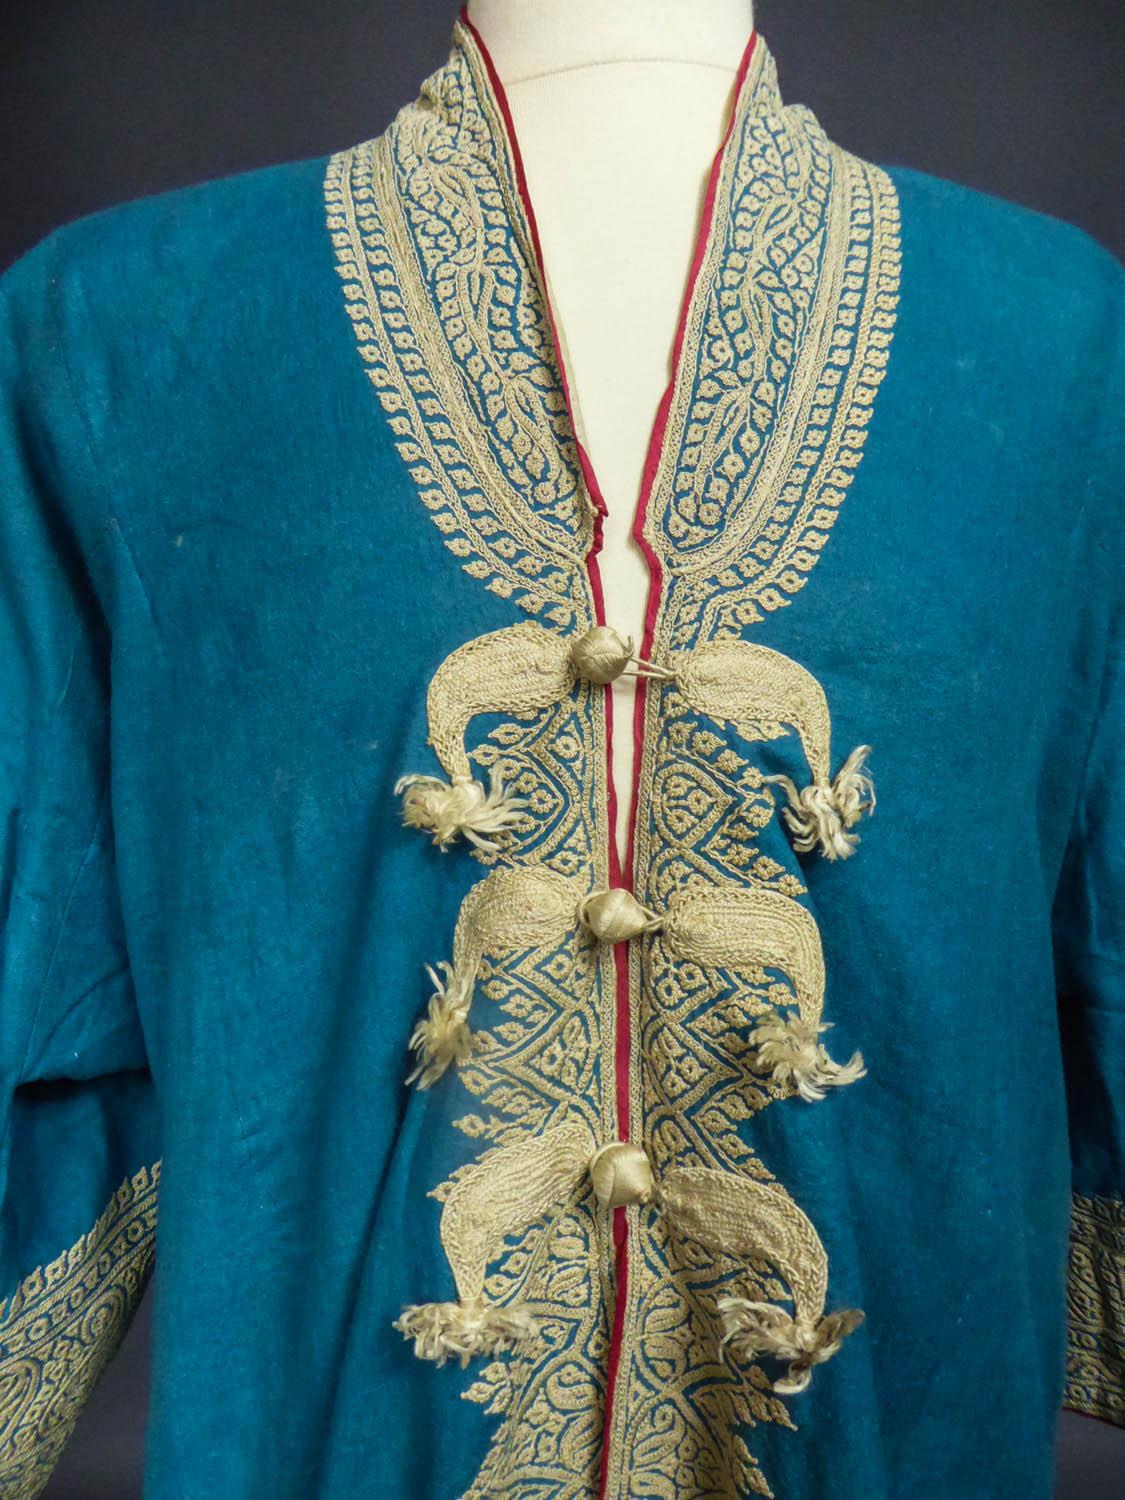 Blue Dignitary coat or Choga - Indes Punjab 19th century